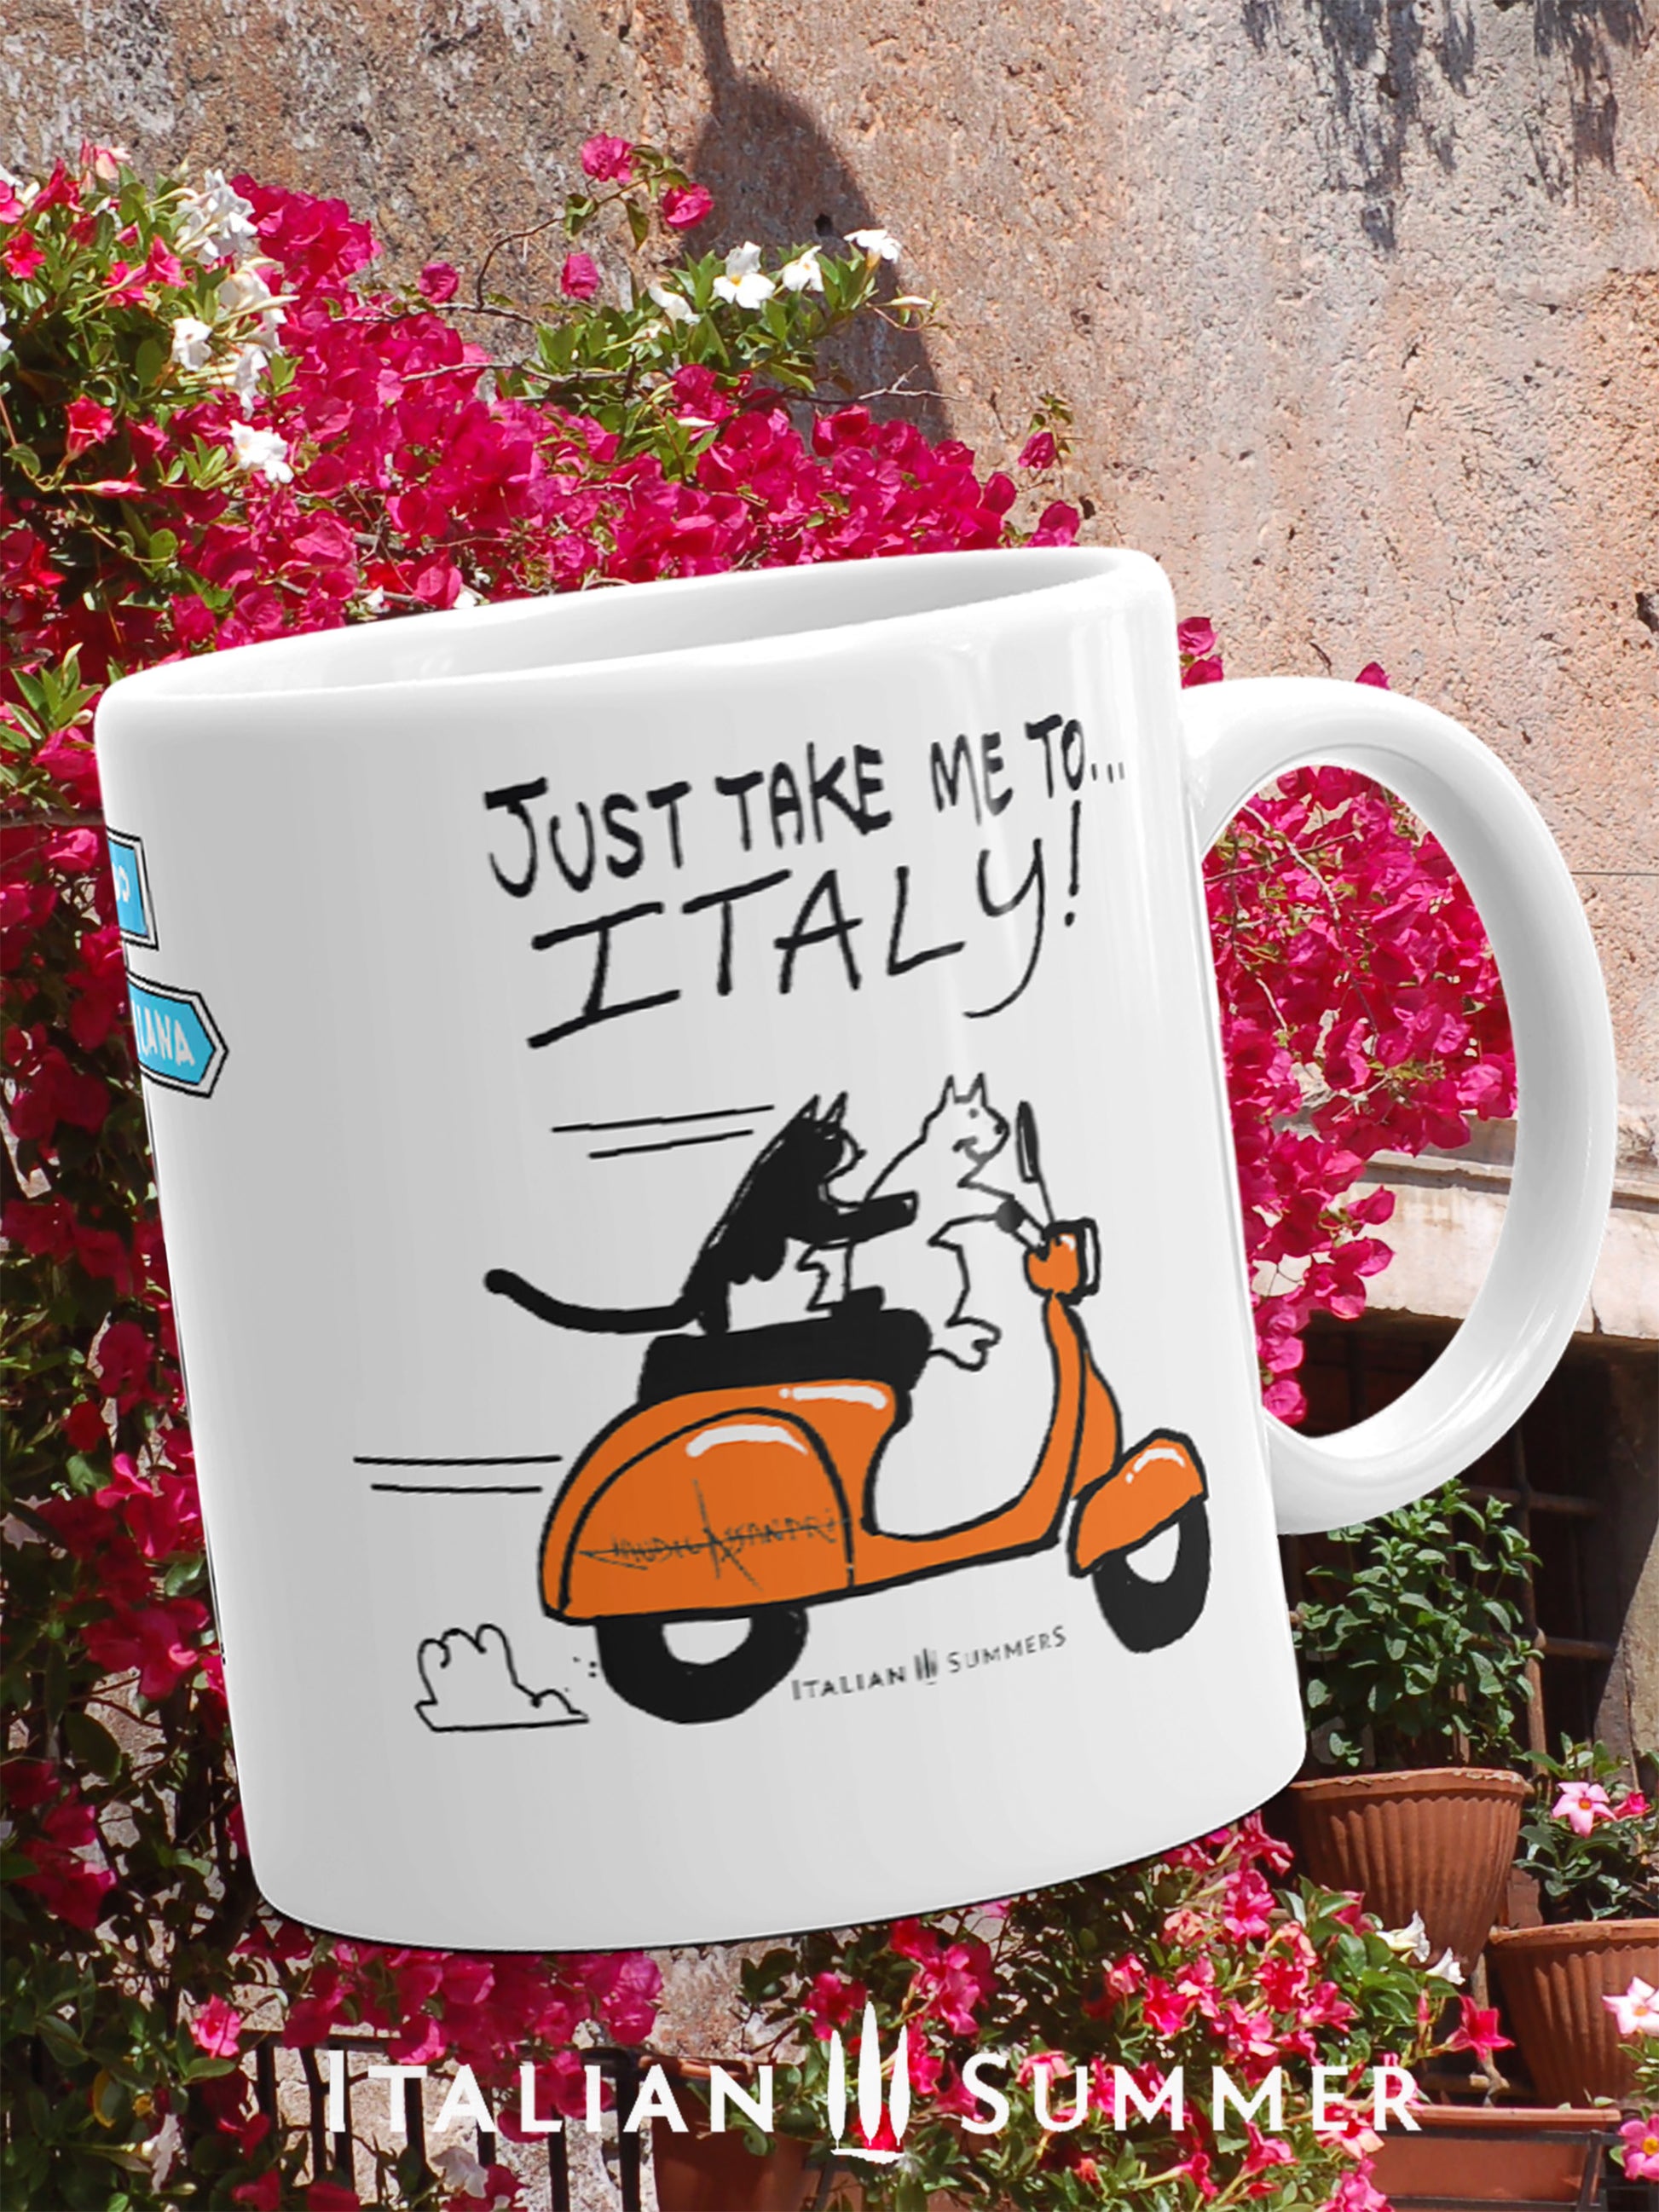 Italy inspired mug with a sketch of 2 cats driving on a vintage orange Vespa, with the quote "Just take me to Italy'. In the center of the mug is a sketch of a streetsign with the locations Positano and Tuscany. Made by Italian Summers